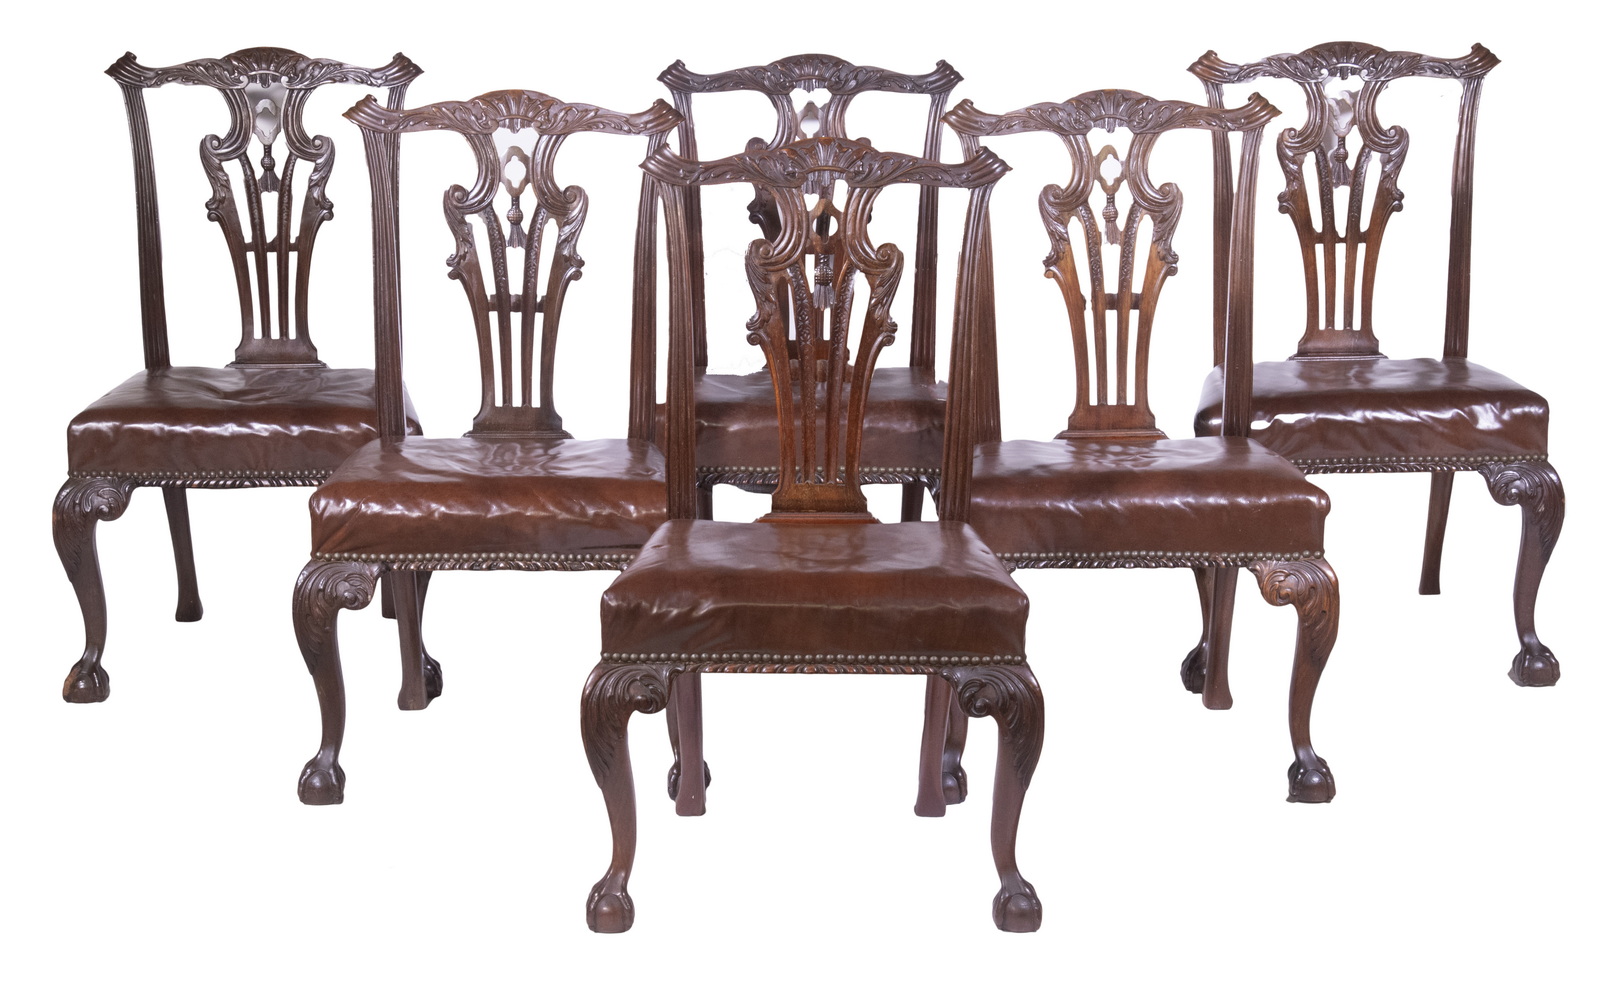 CENTENNIAL CHIPPENDALE DINING CHAIRS 3b6746